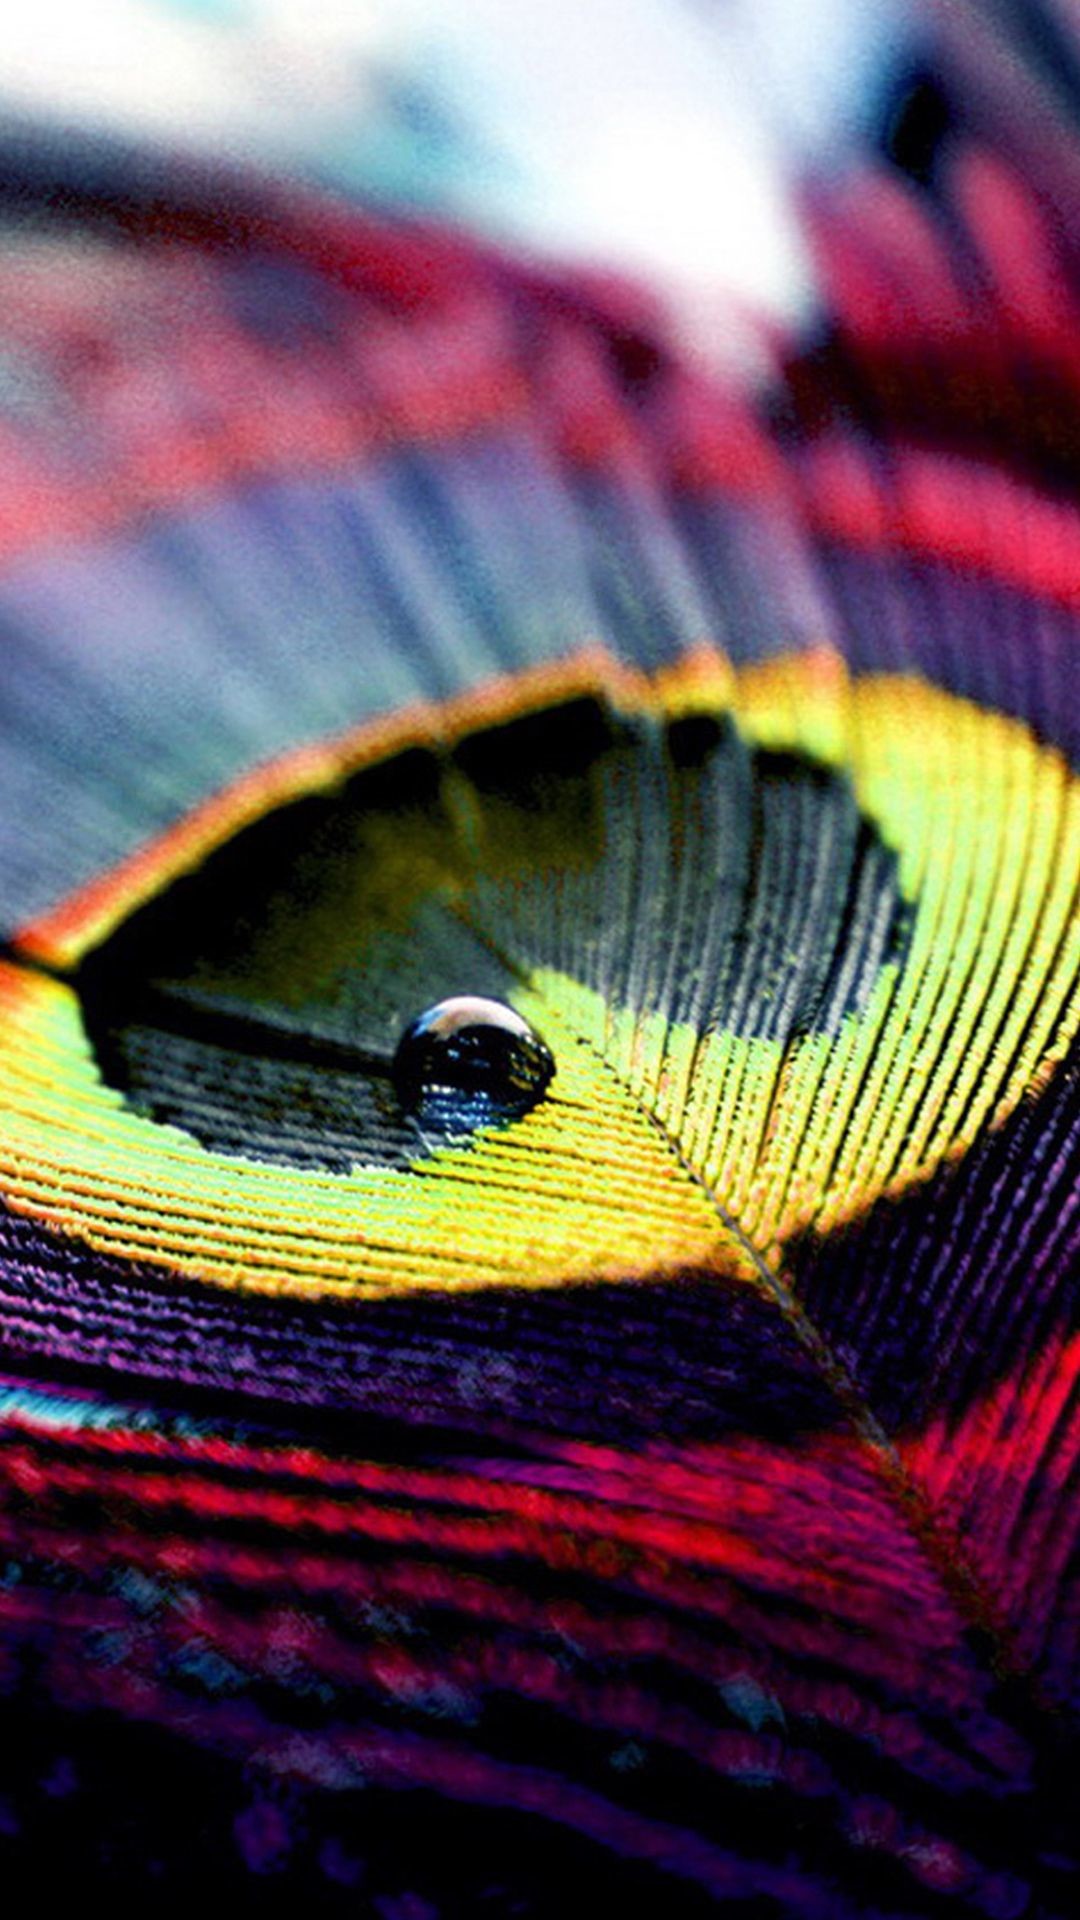 Peacock Feather Wallpaper For Mobile - Peacock Feather Wallpaper Hd - HD Wallpaper 